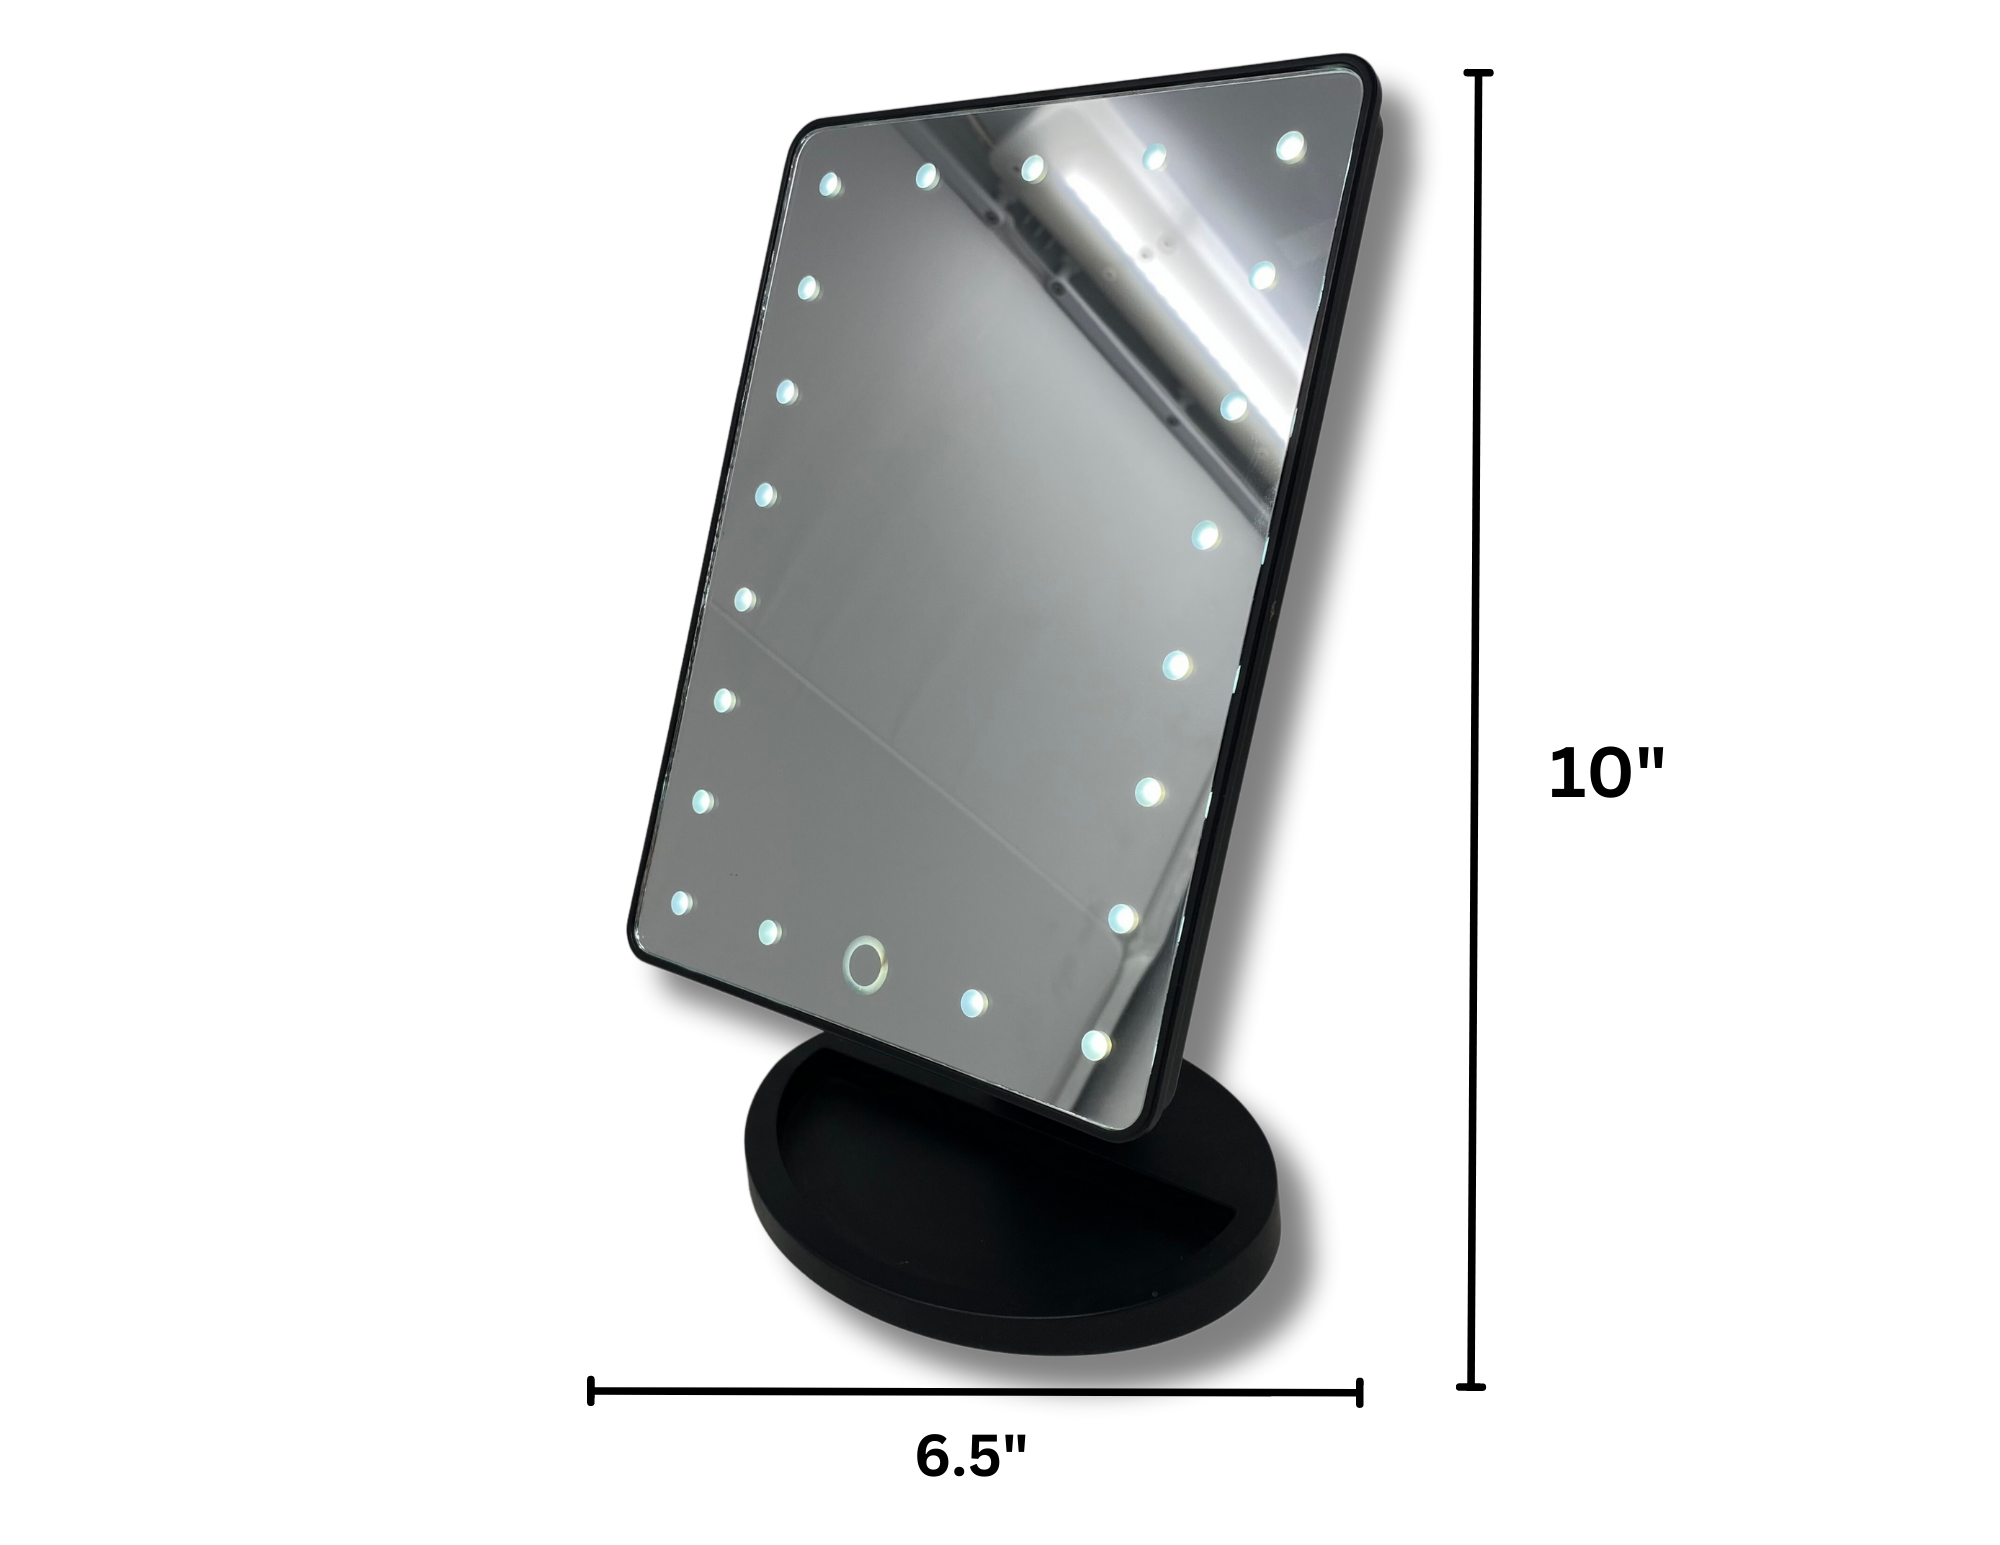 CLEARANCE BEBE Studio Pro LED Lighted Touch Mirror (6.5"L x 10"H)